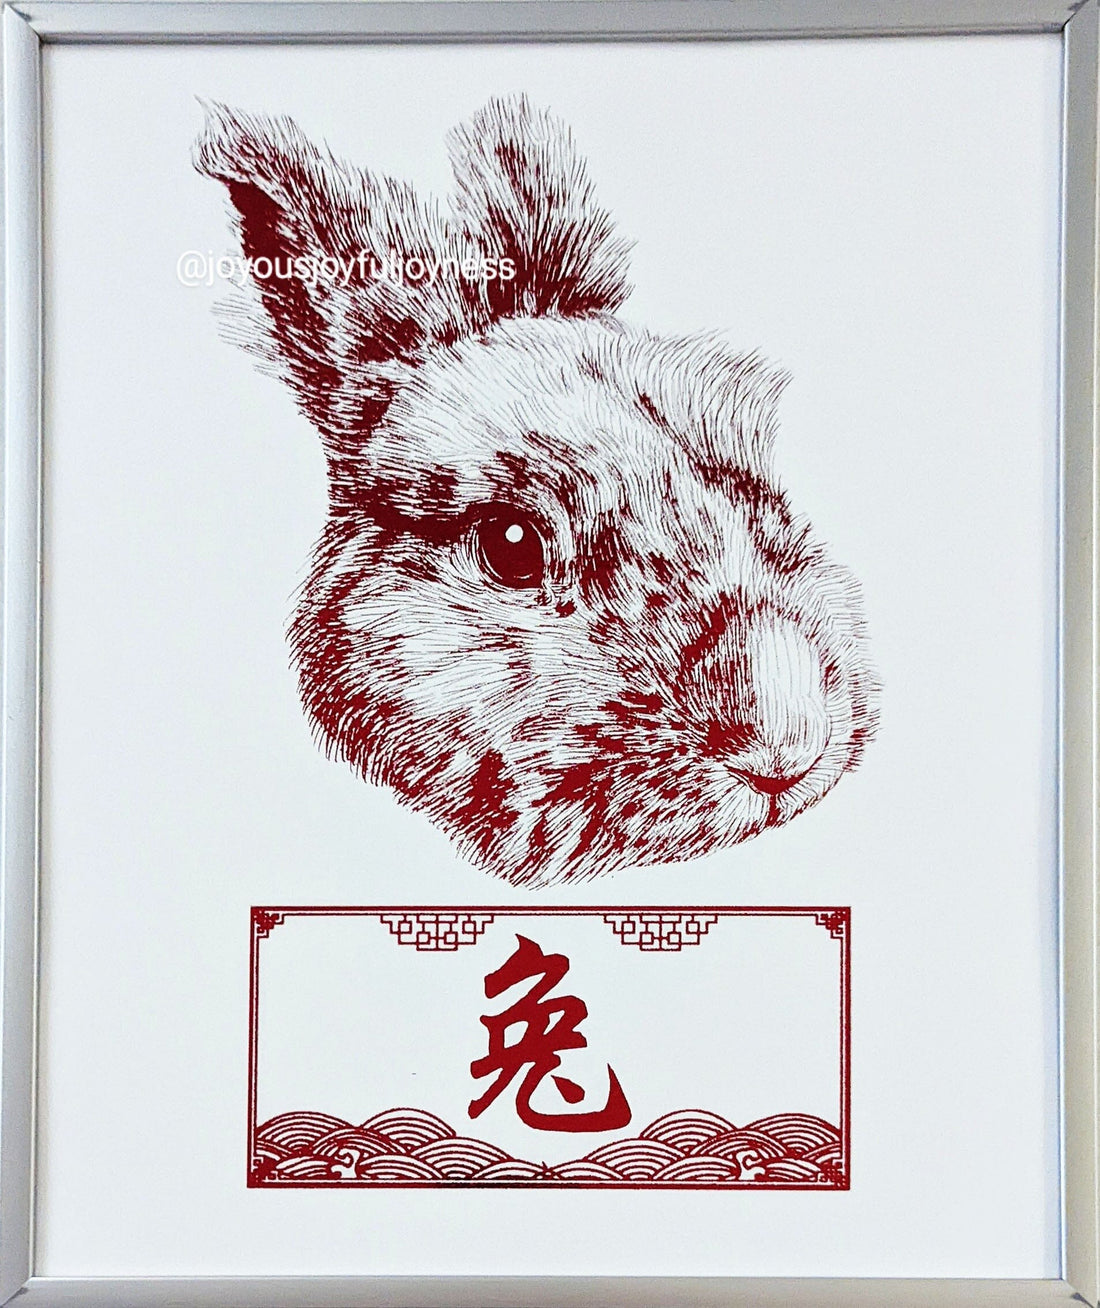 Purchase Your Chinese Zodiac Animal Art Today